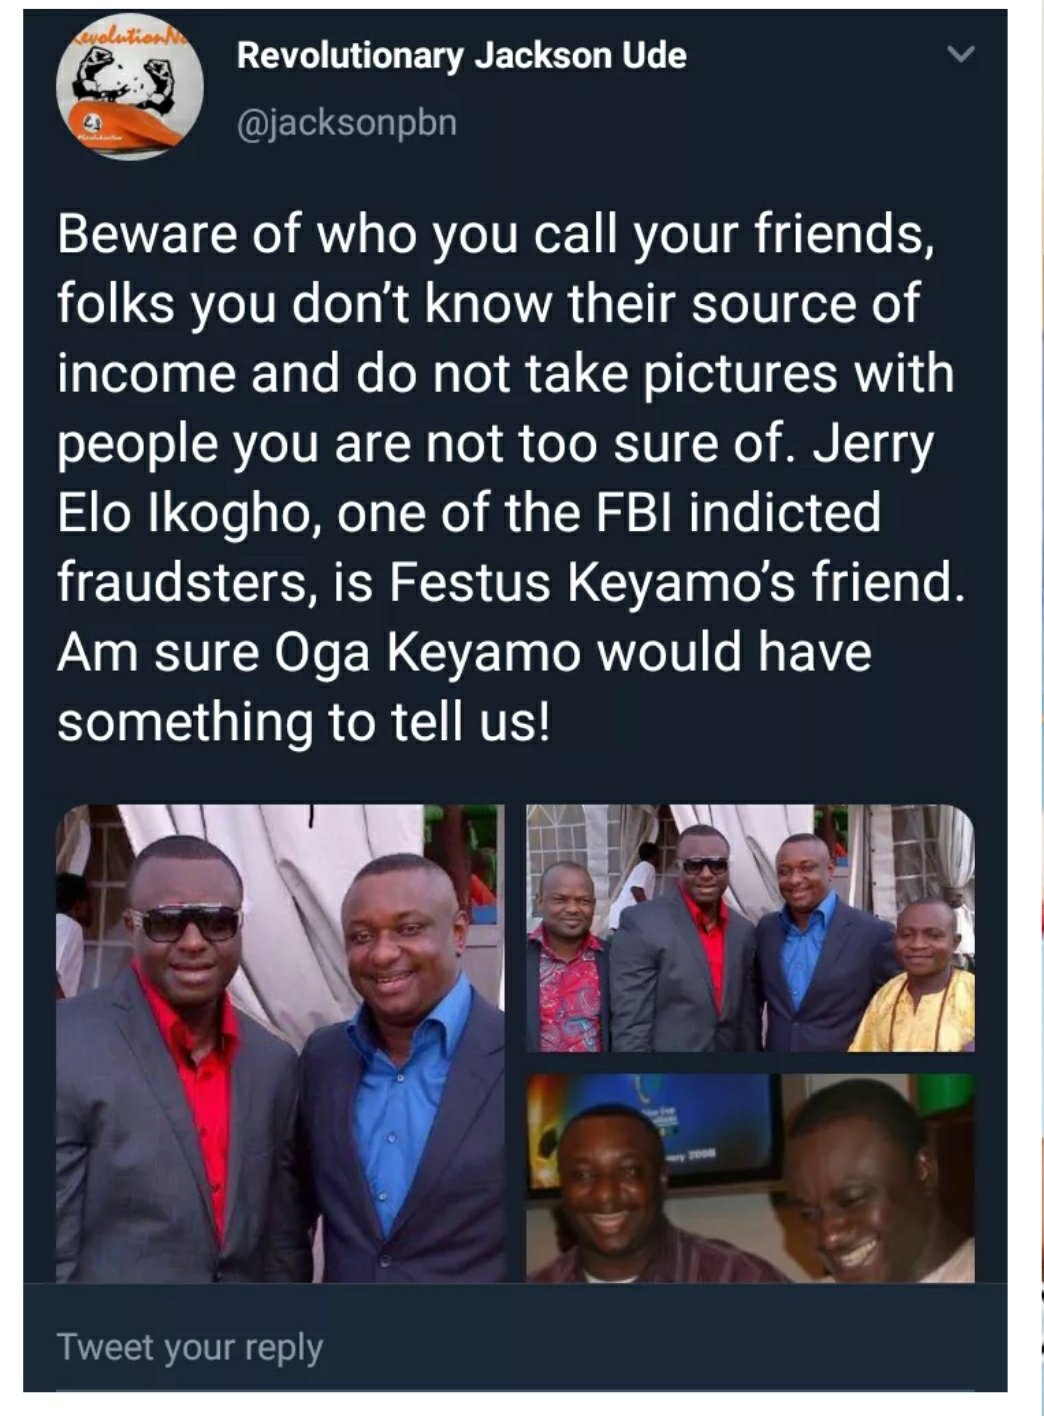 Festus keyamo spotted with an alleged scammer, Jerry Elo Ikogho.